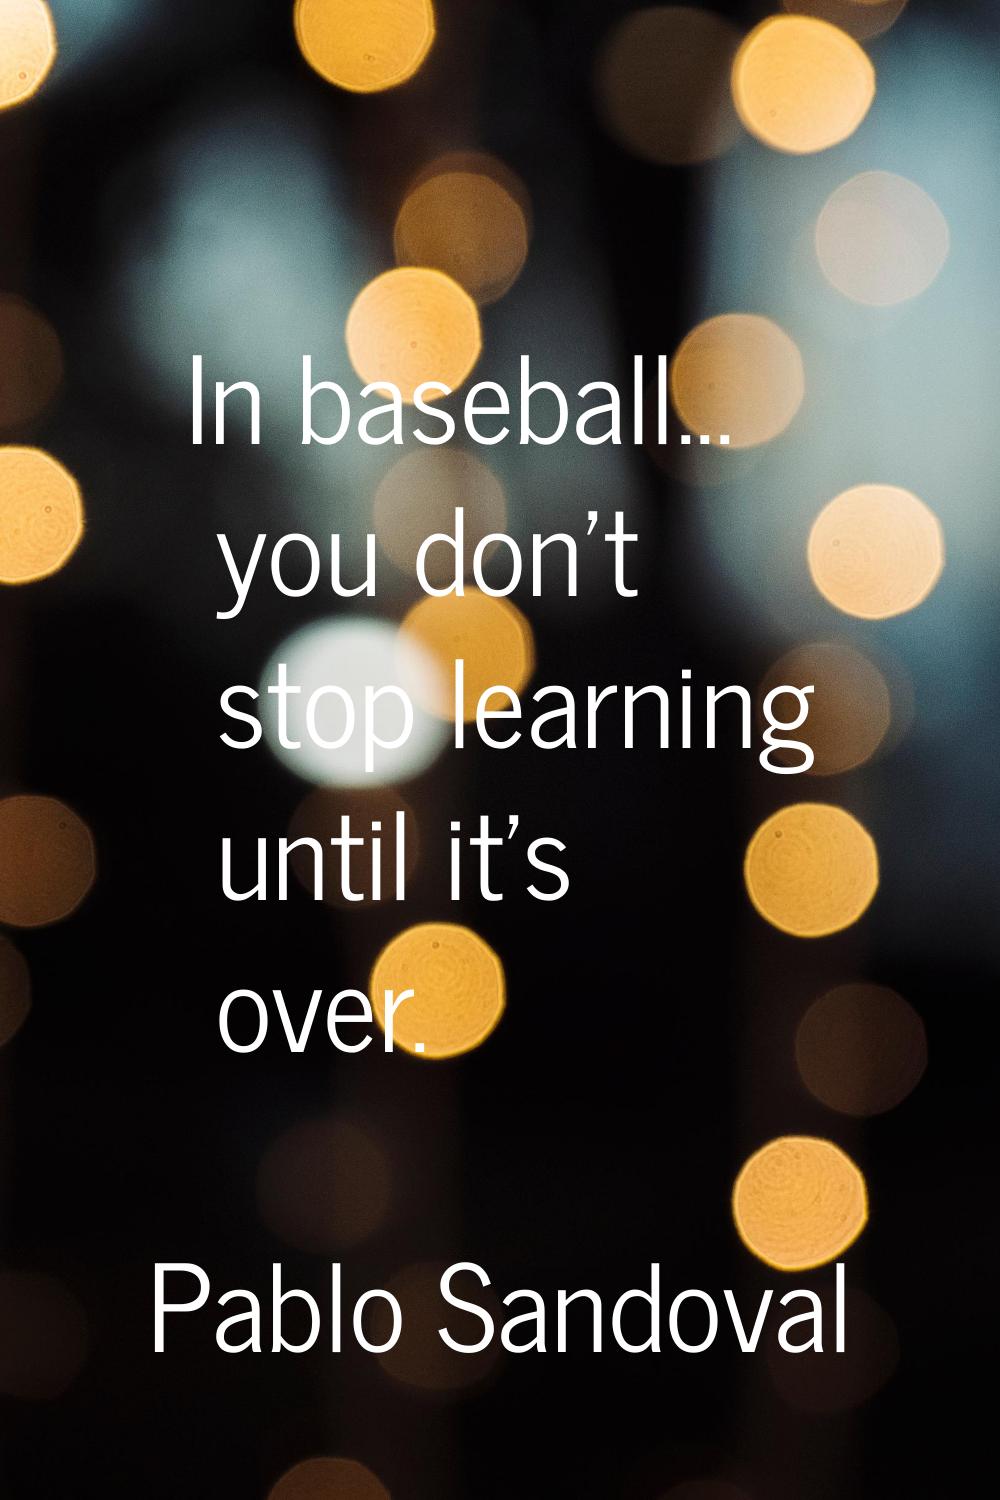 In baseball... you don't stop learning until it's over.